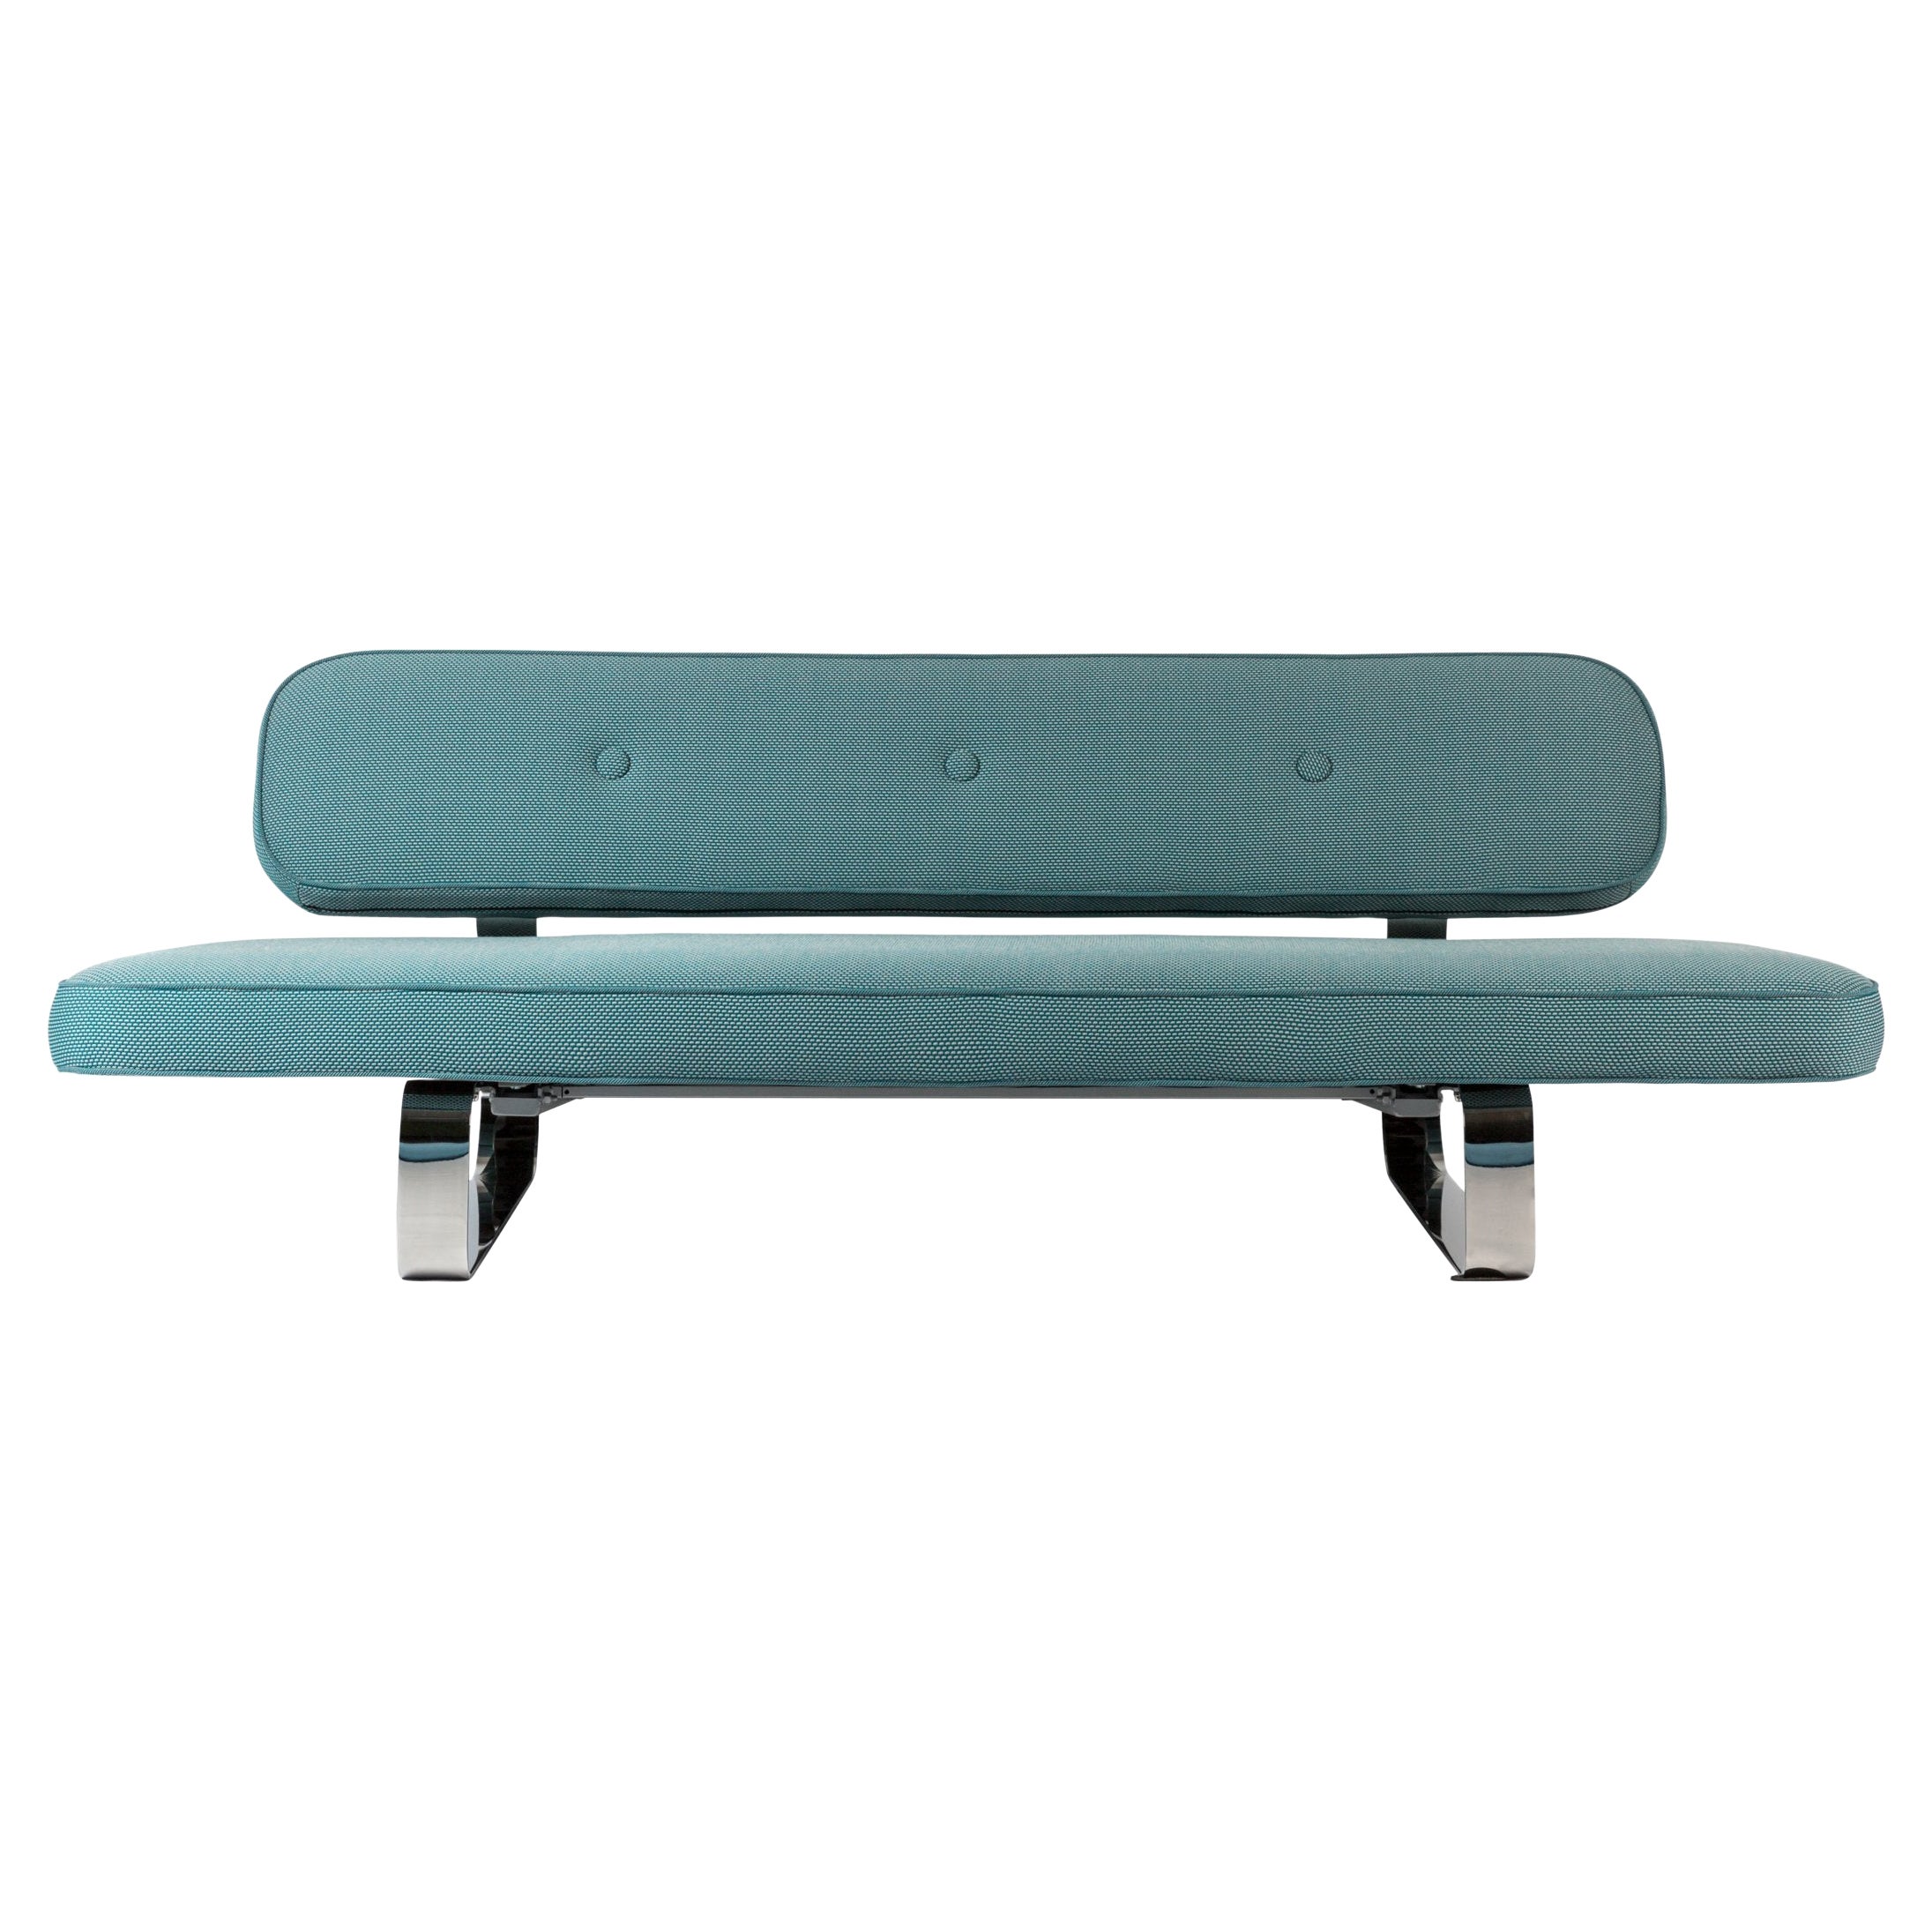 Moooi Power Nap Sofa in Steelcut Trio 3, 983 Upholstery with Steel Frame